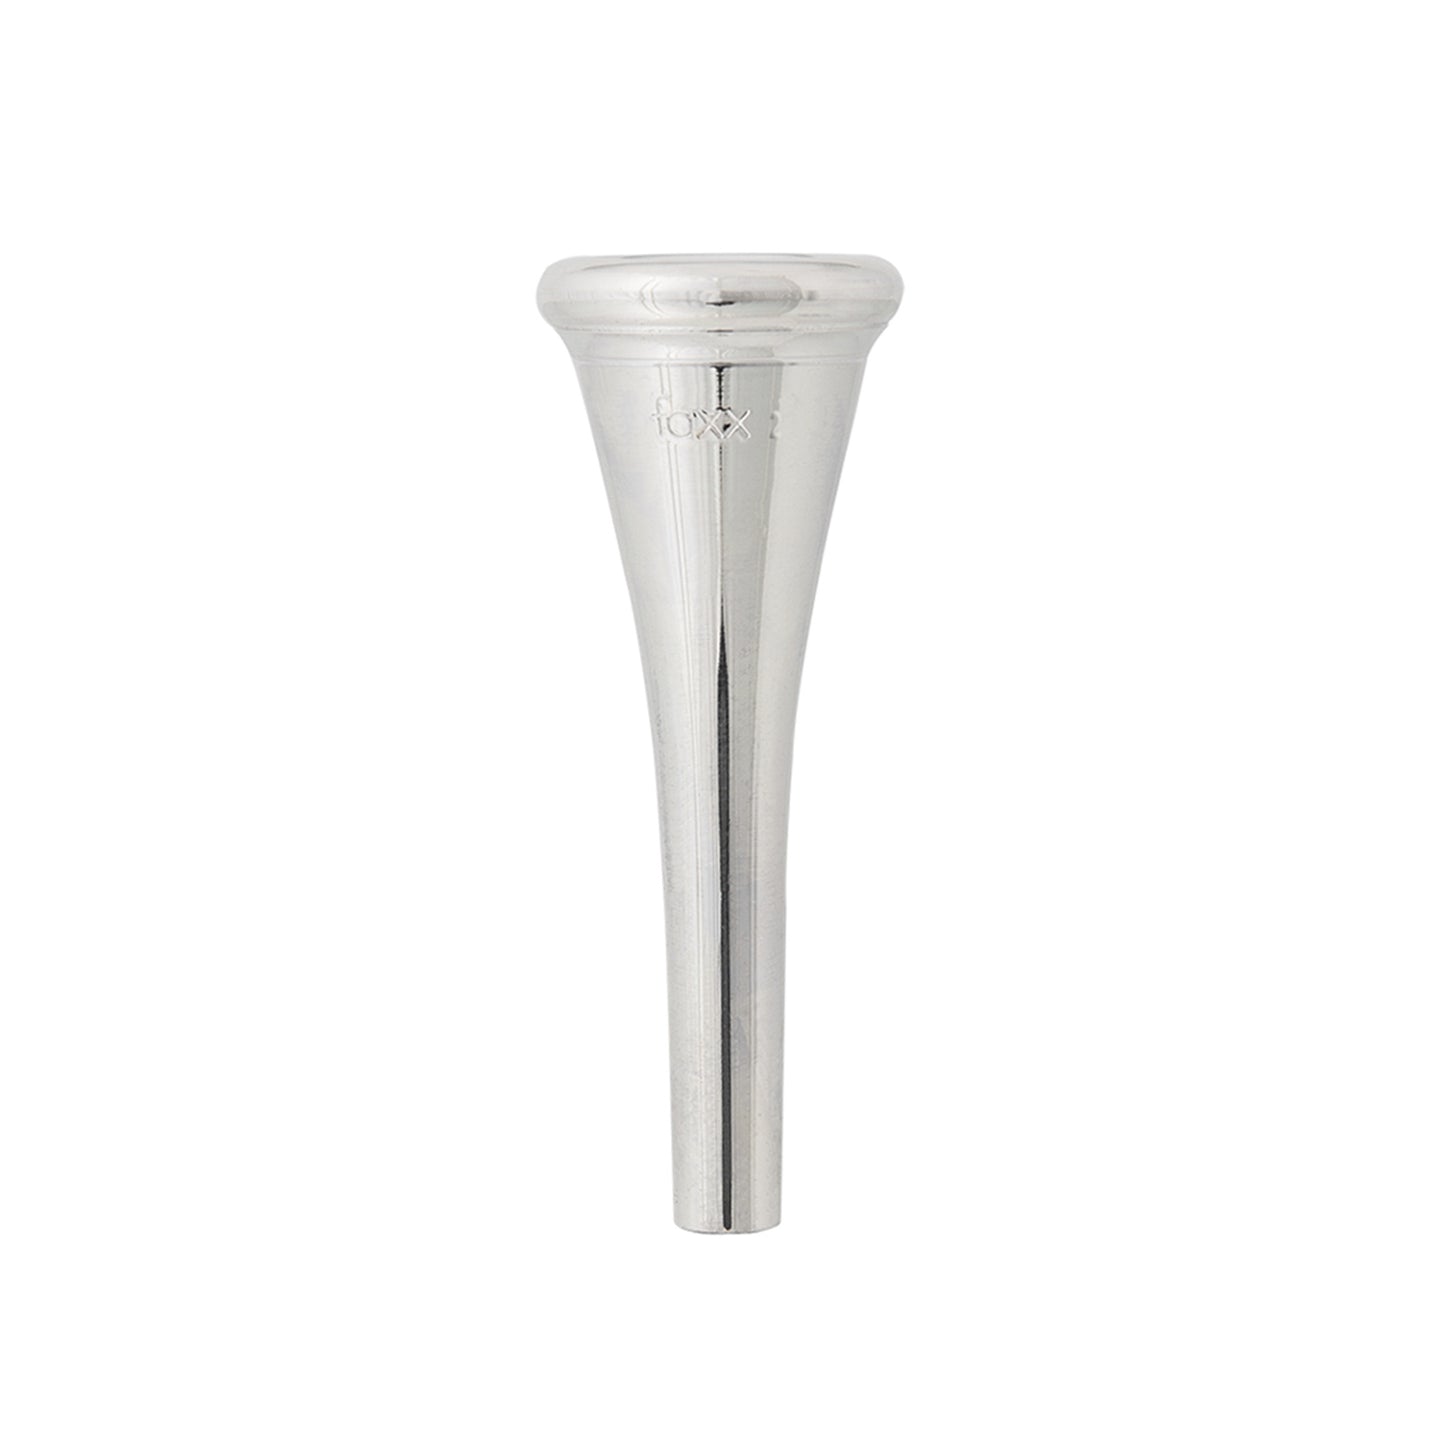 Faxx French Horn Mouthpiece MDC